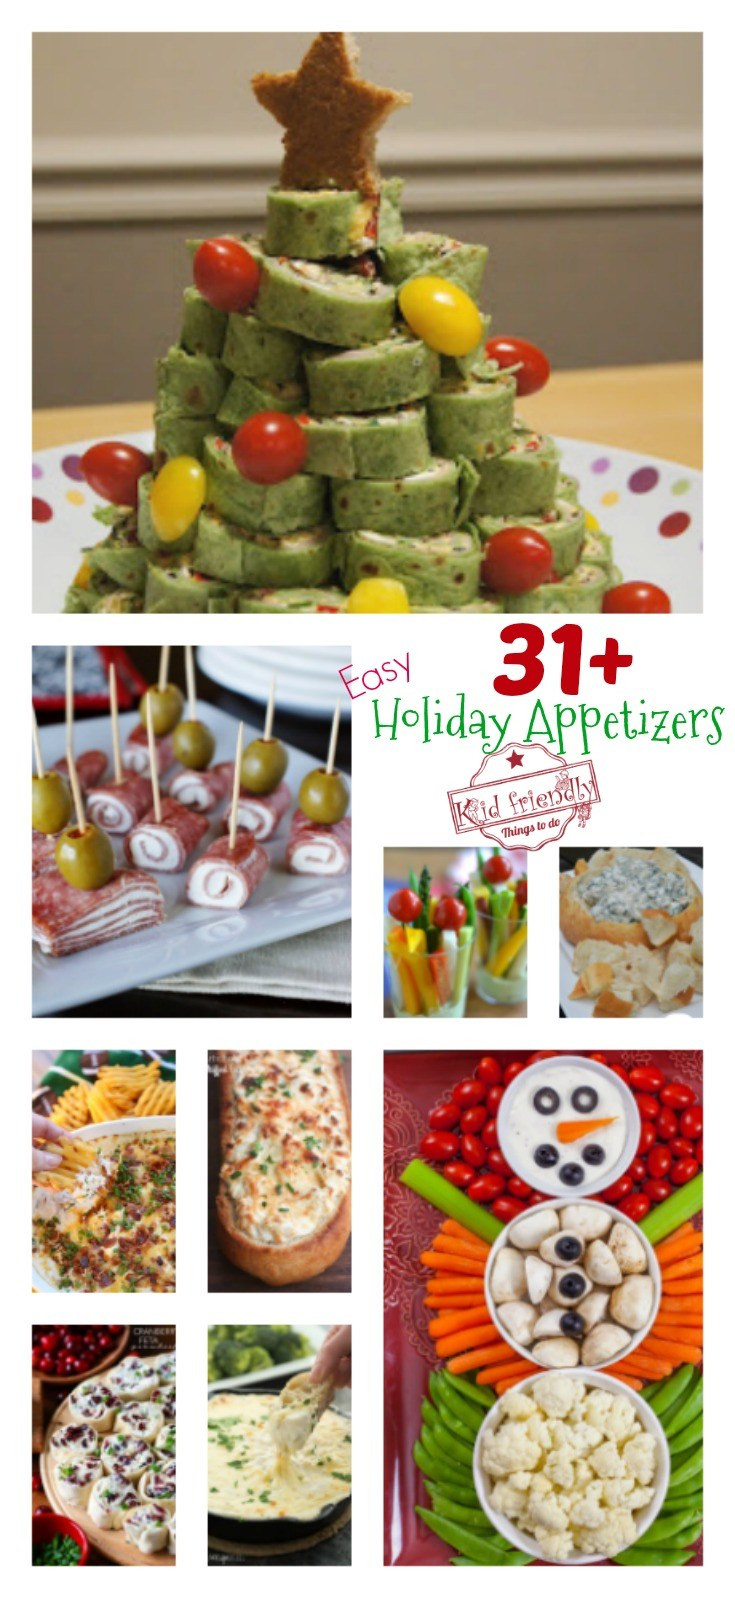 Easy Appetizers For Christmas
 Over 31 Easy Holiday Appetizers to Make for Christmas New